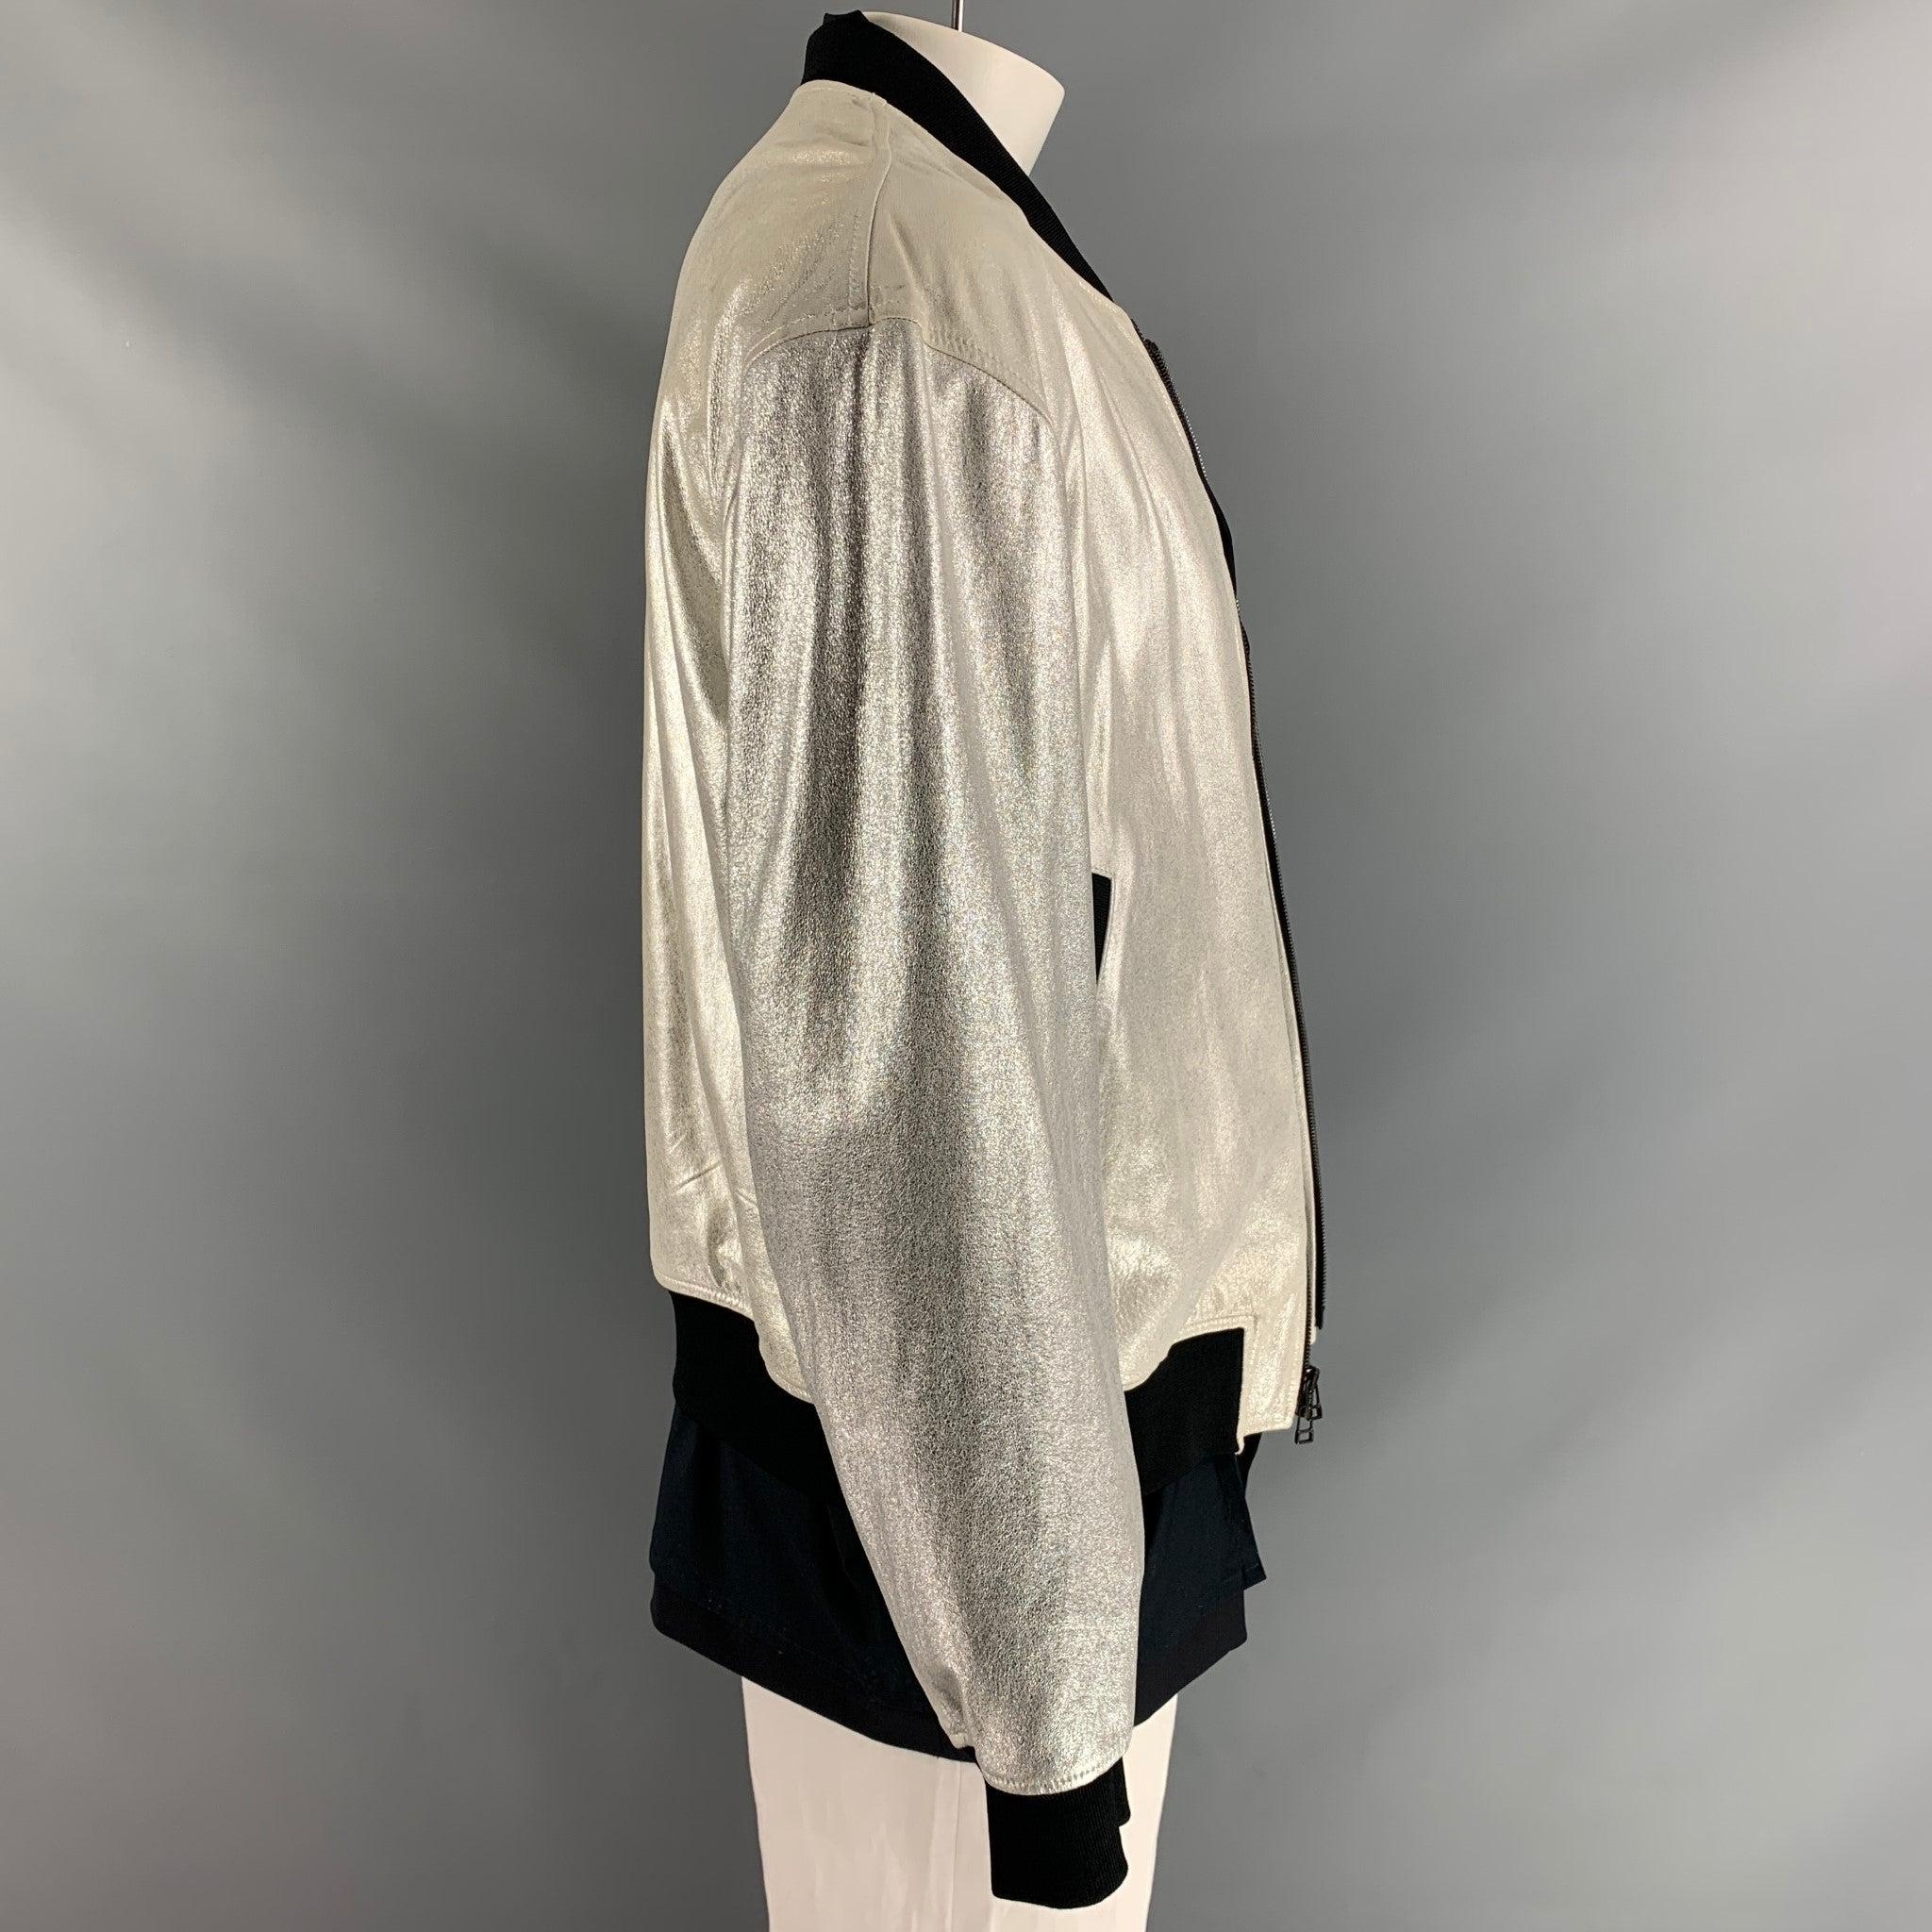 3.1 PHILLIP LIM bomber jacket, fully lined comes in silver lamb leather, black wool and cotton fabrics featuring simulated layers and two welt pockets at front.Excellent Pre-Owned Condition.  

Marked:   L 

Measurements: 
 
Shoulder: 23 inChest: 52